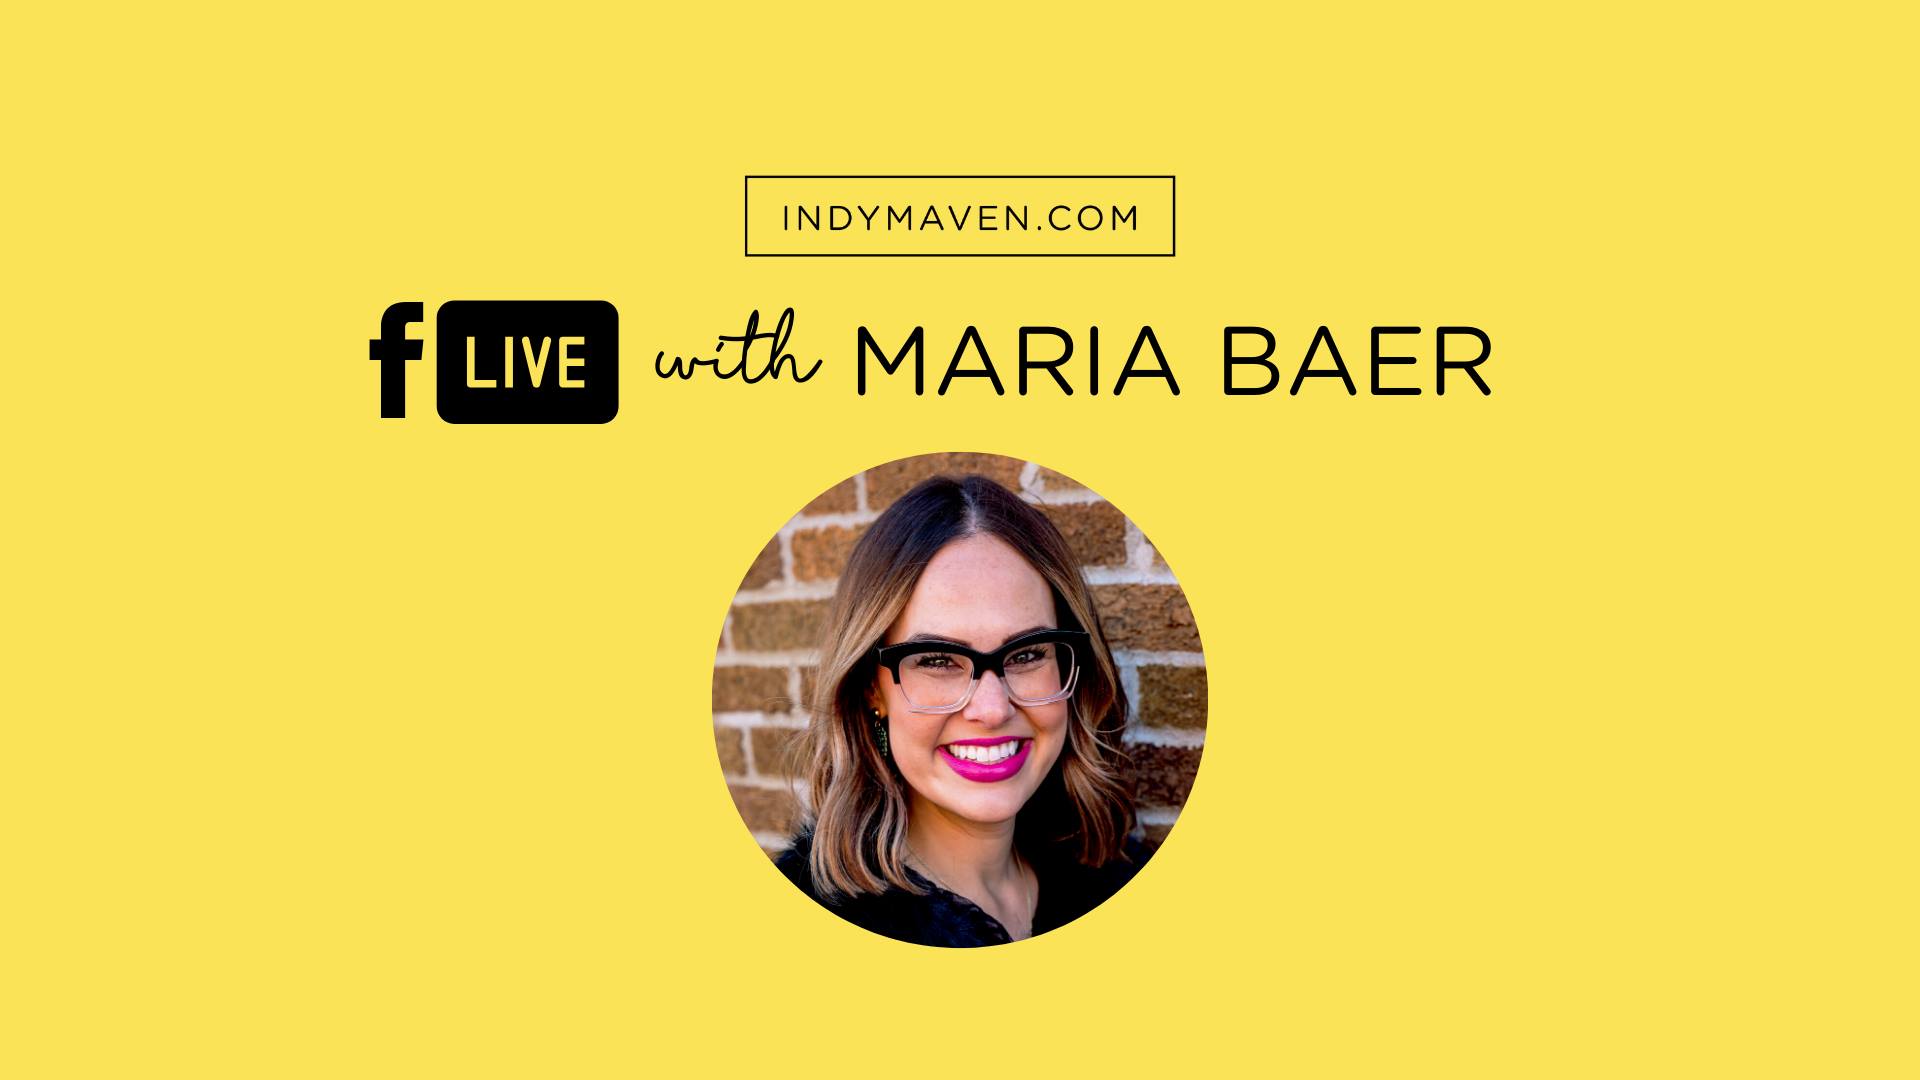 Facebook-Live-with-The-Baer-Minimalist-Indy-Maven